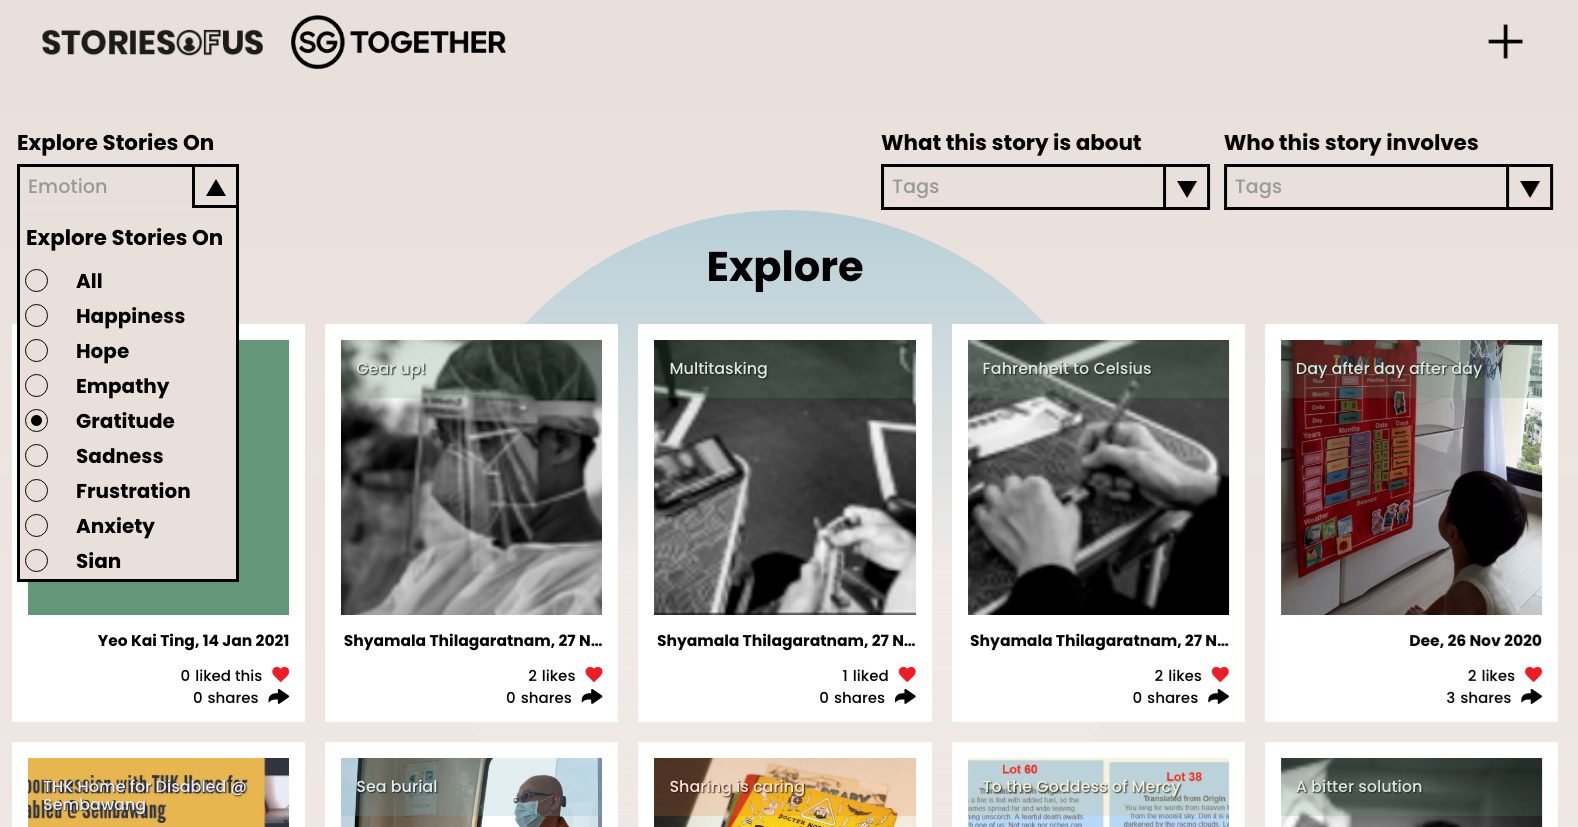 Screengrab 2: Visitors can explore stories by different tags, including emotions ranging from happiness to “sian”.